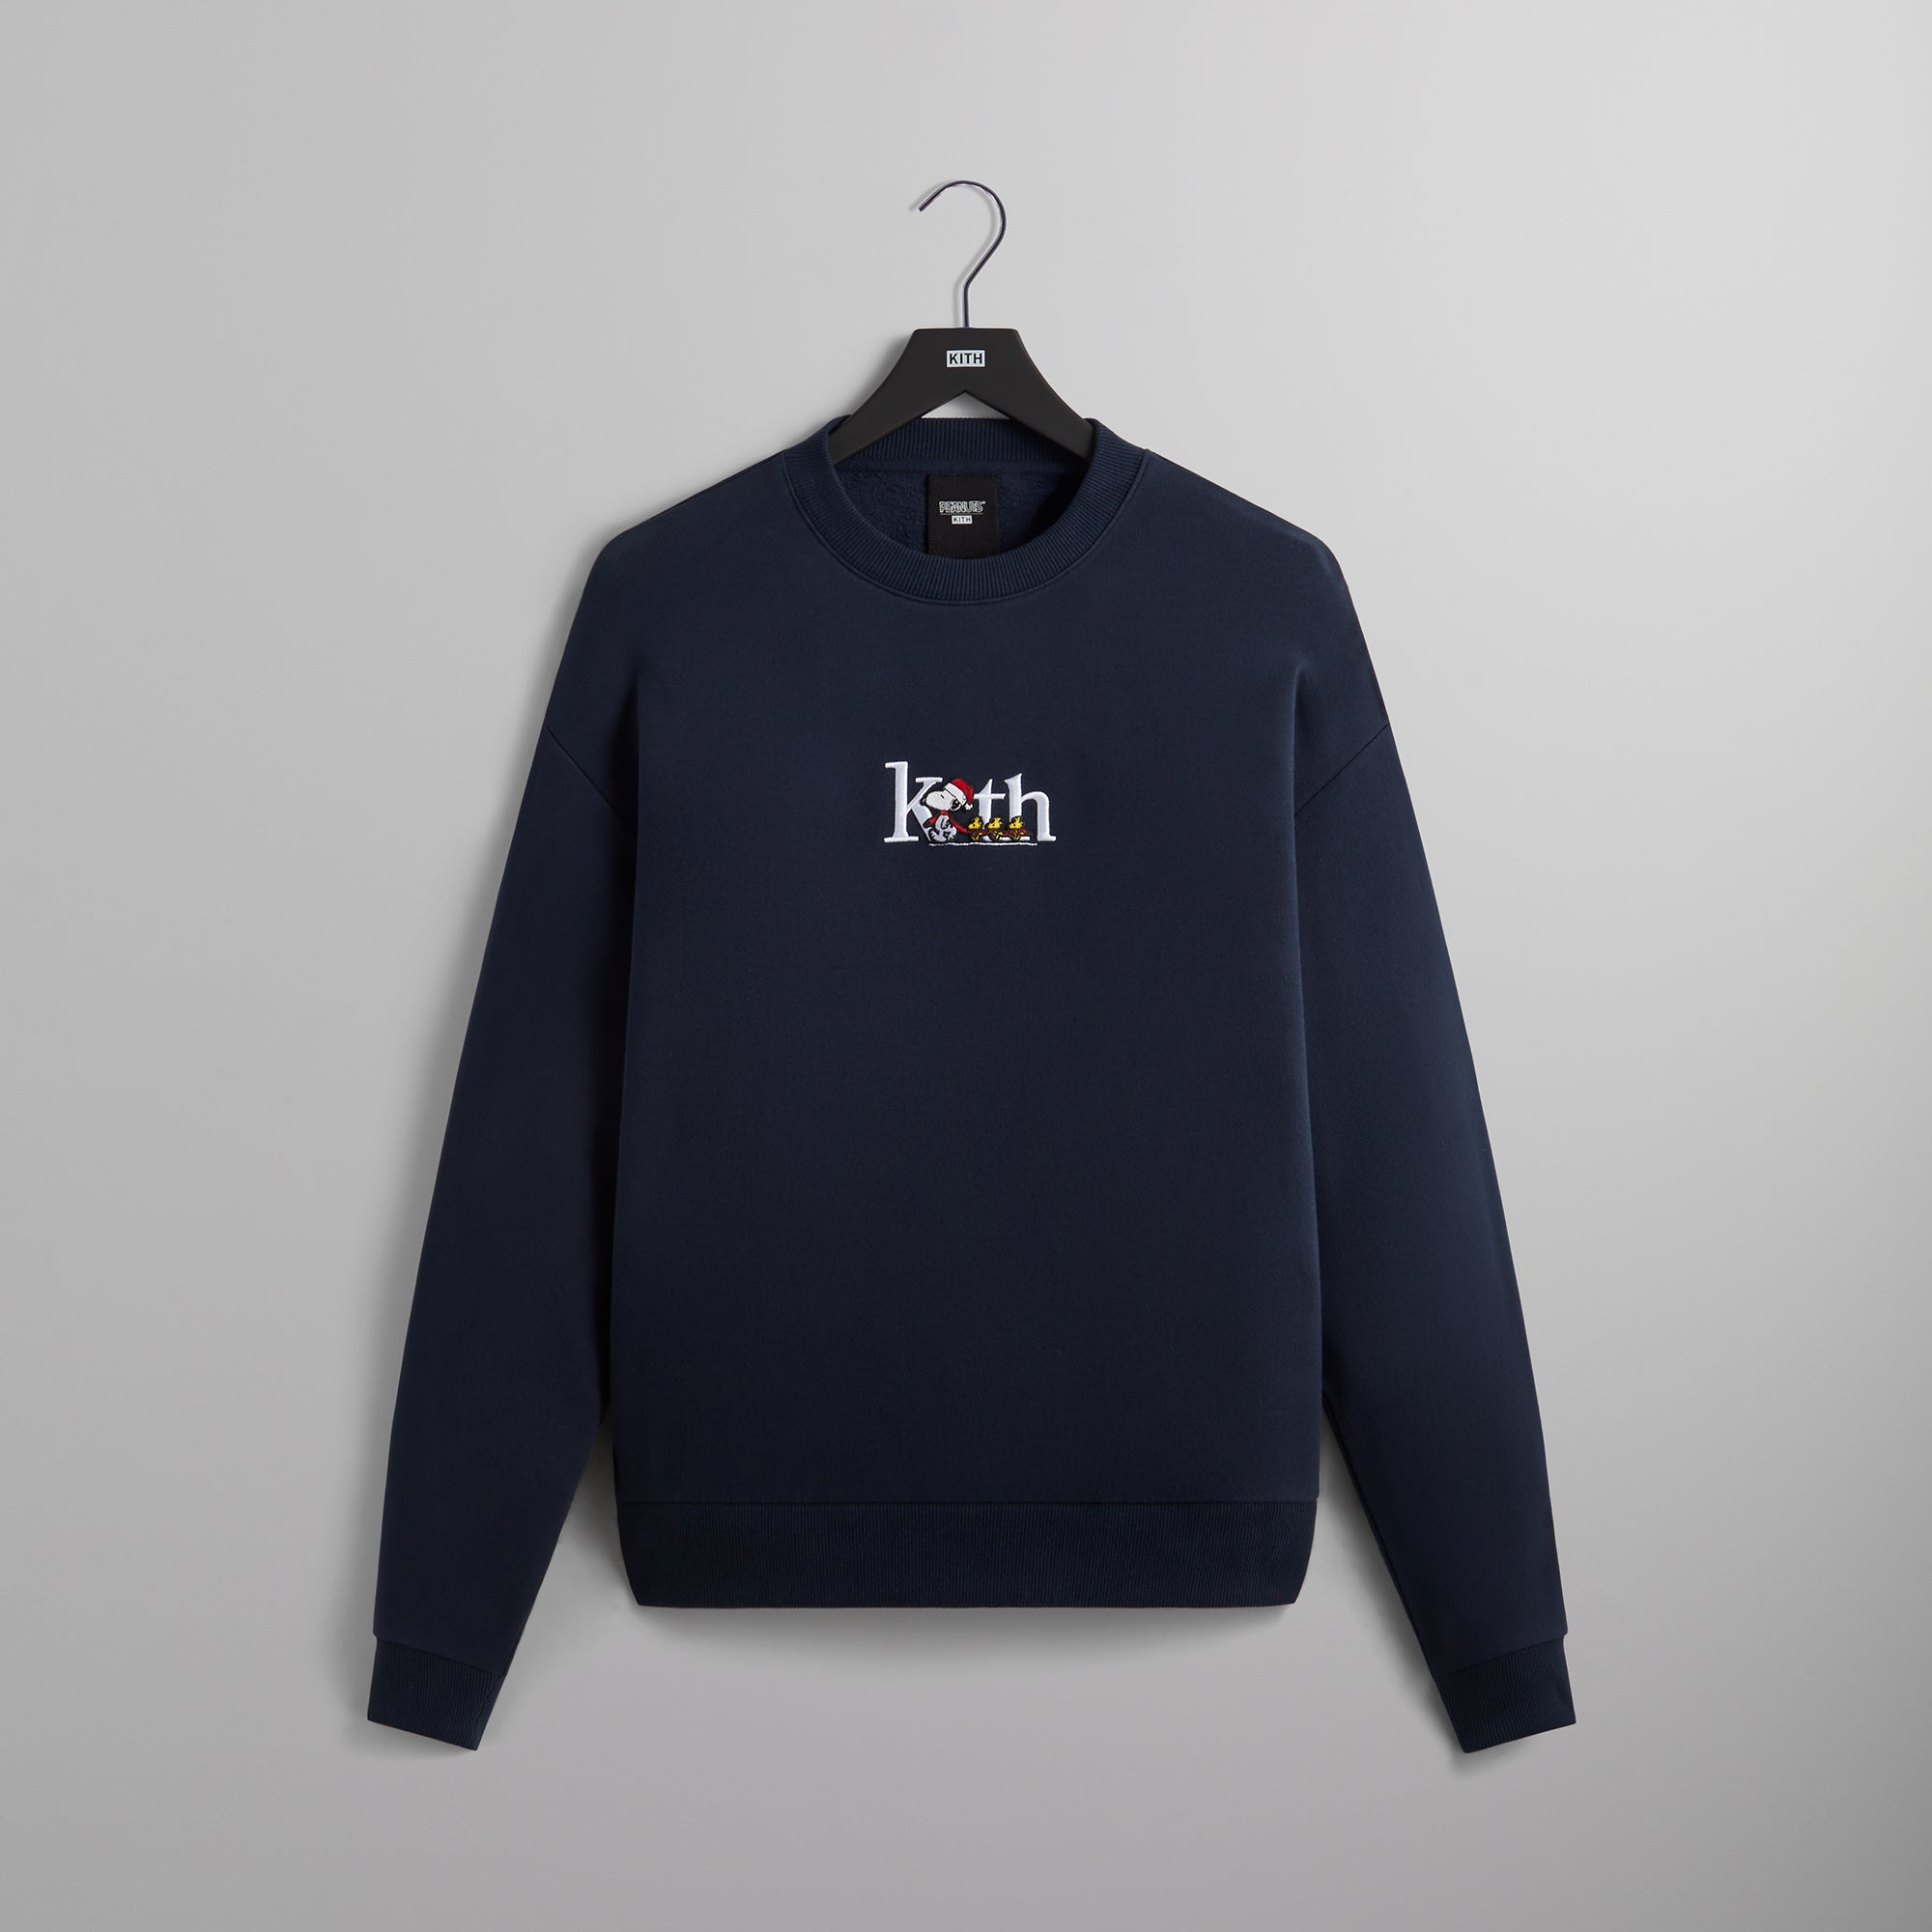 Kith for Peanuts Serif Crewneck - Nocturnal PH